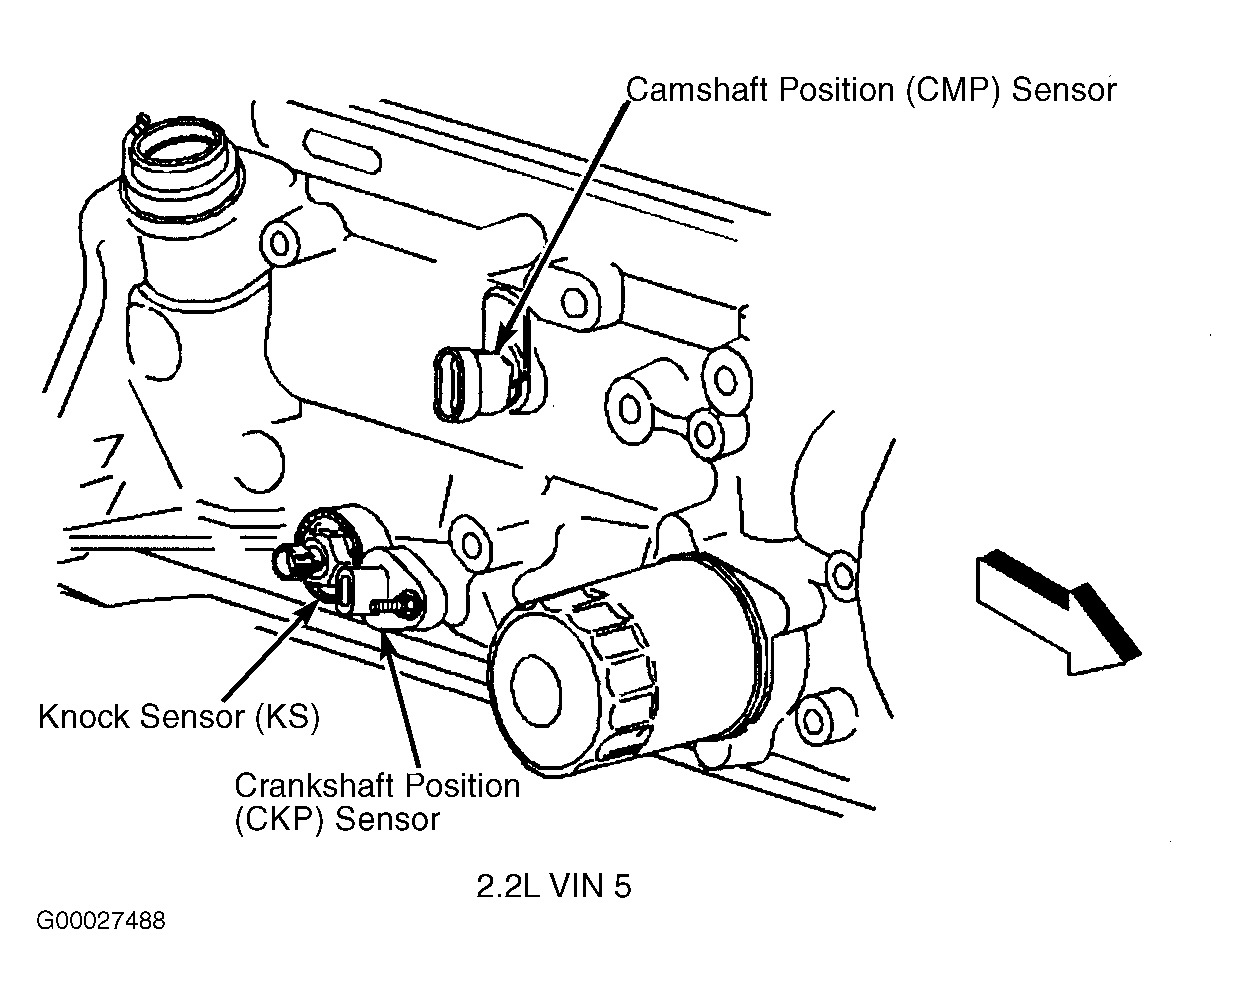 GMC Jimmy 2003 - Component Locations -  Right Side Of Engine (2.2L VIN 5)